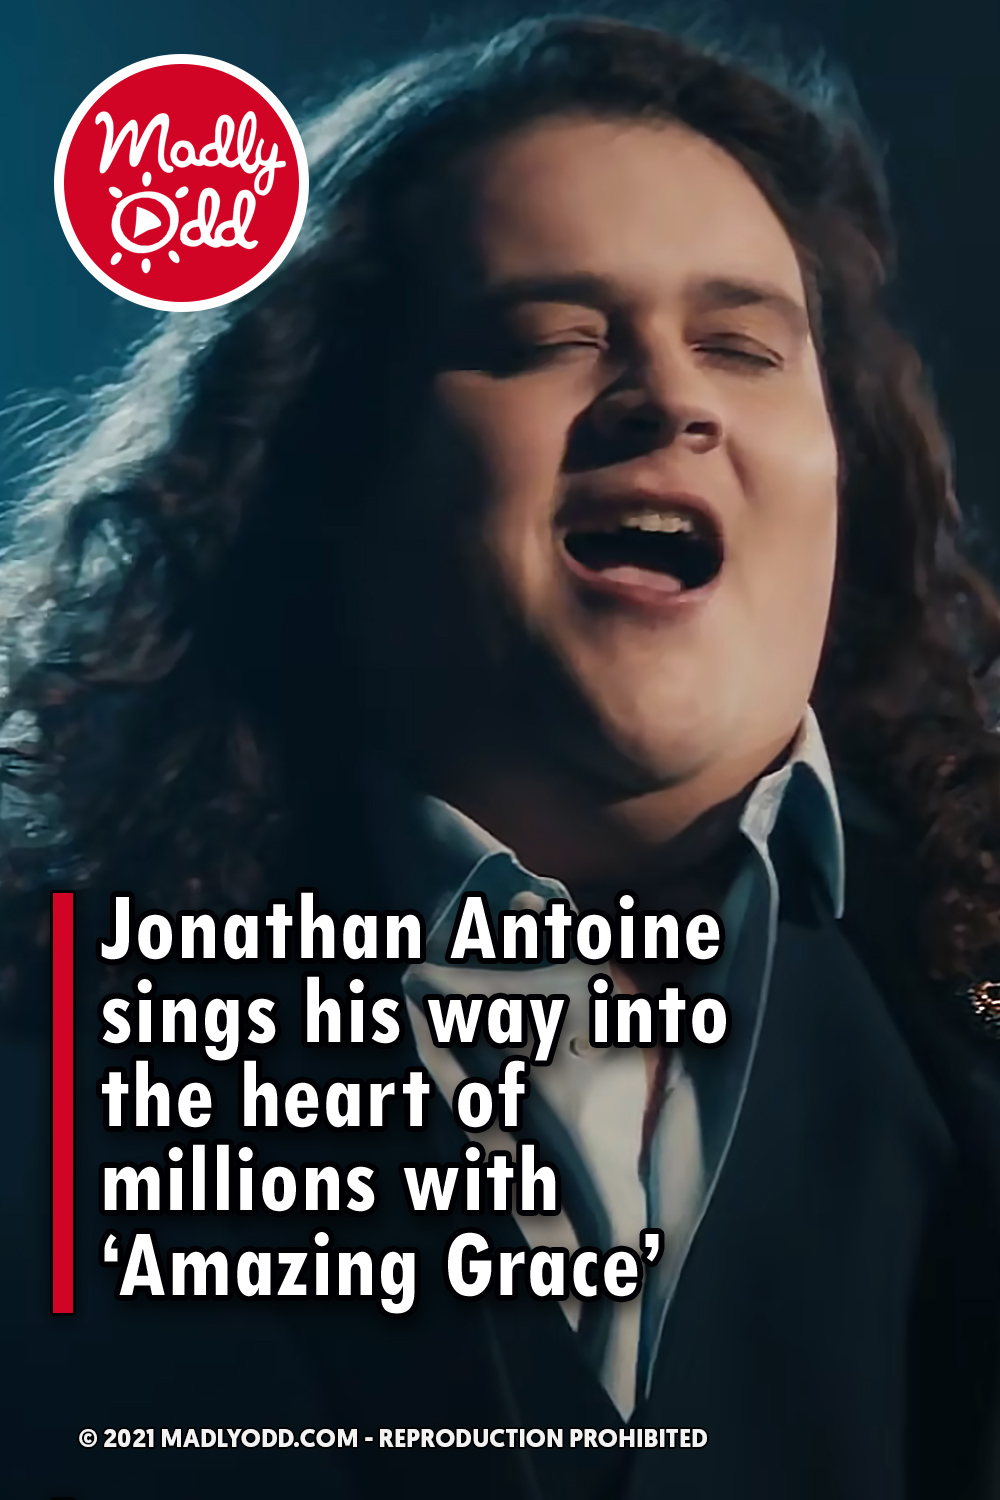 Jonathan Antoine sings his way into the heart of millions with ‘Amazing Grace’